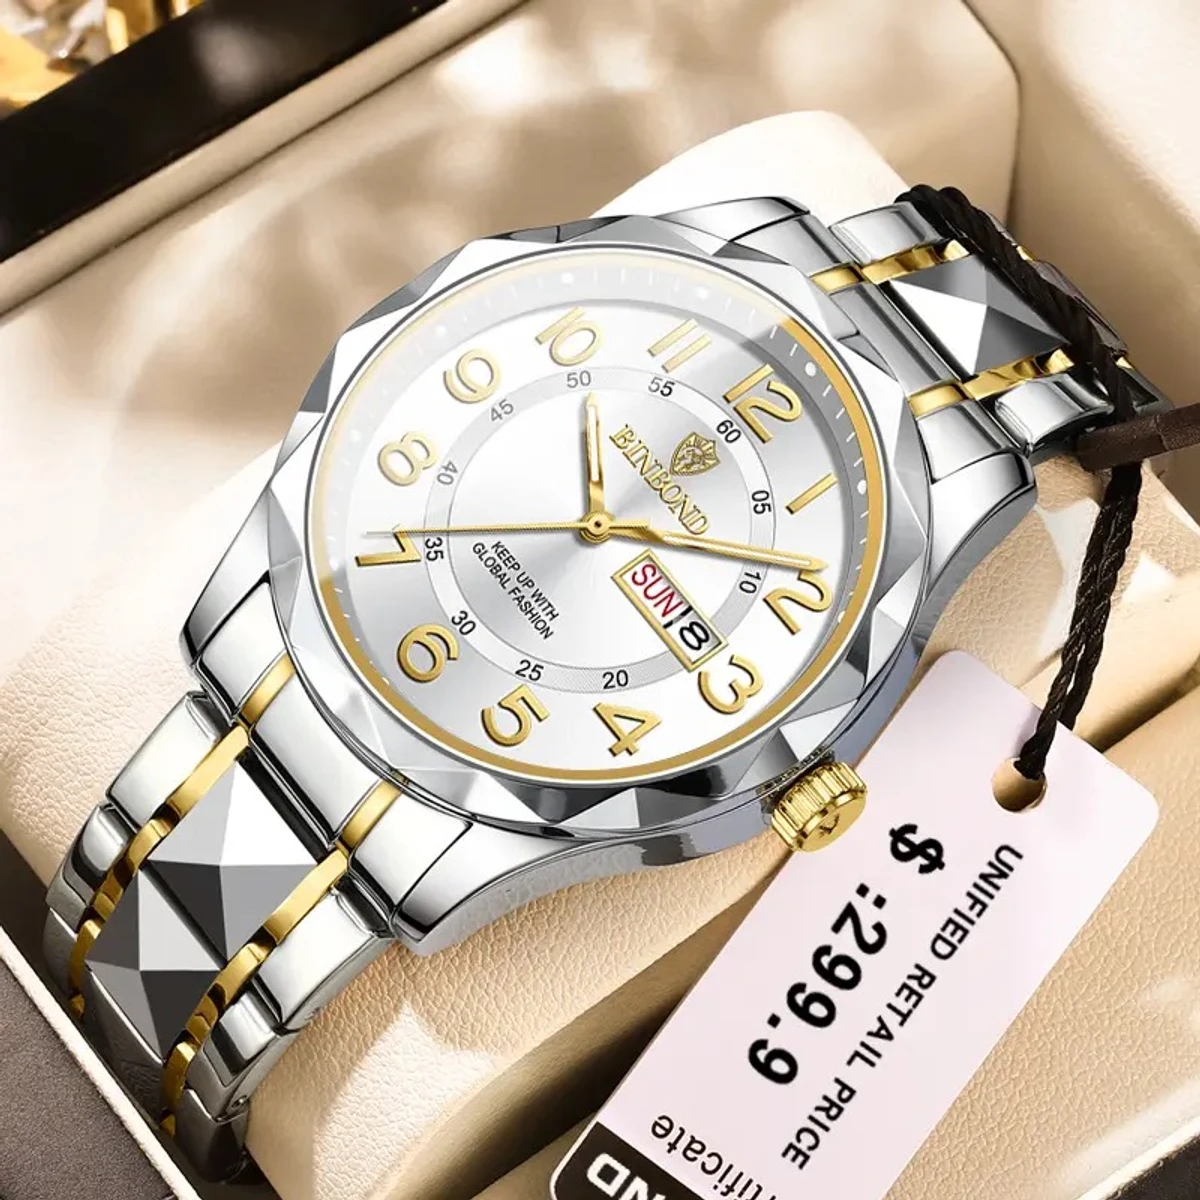 Luxury Binbond Dimon card Digain Stainless Steel Classic Waterproof Watch BINBOND MODEL 5663 CHAIN TOTON AR DIAL WHITE  COOLER WATCH FOR MAN